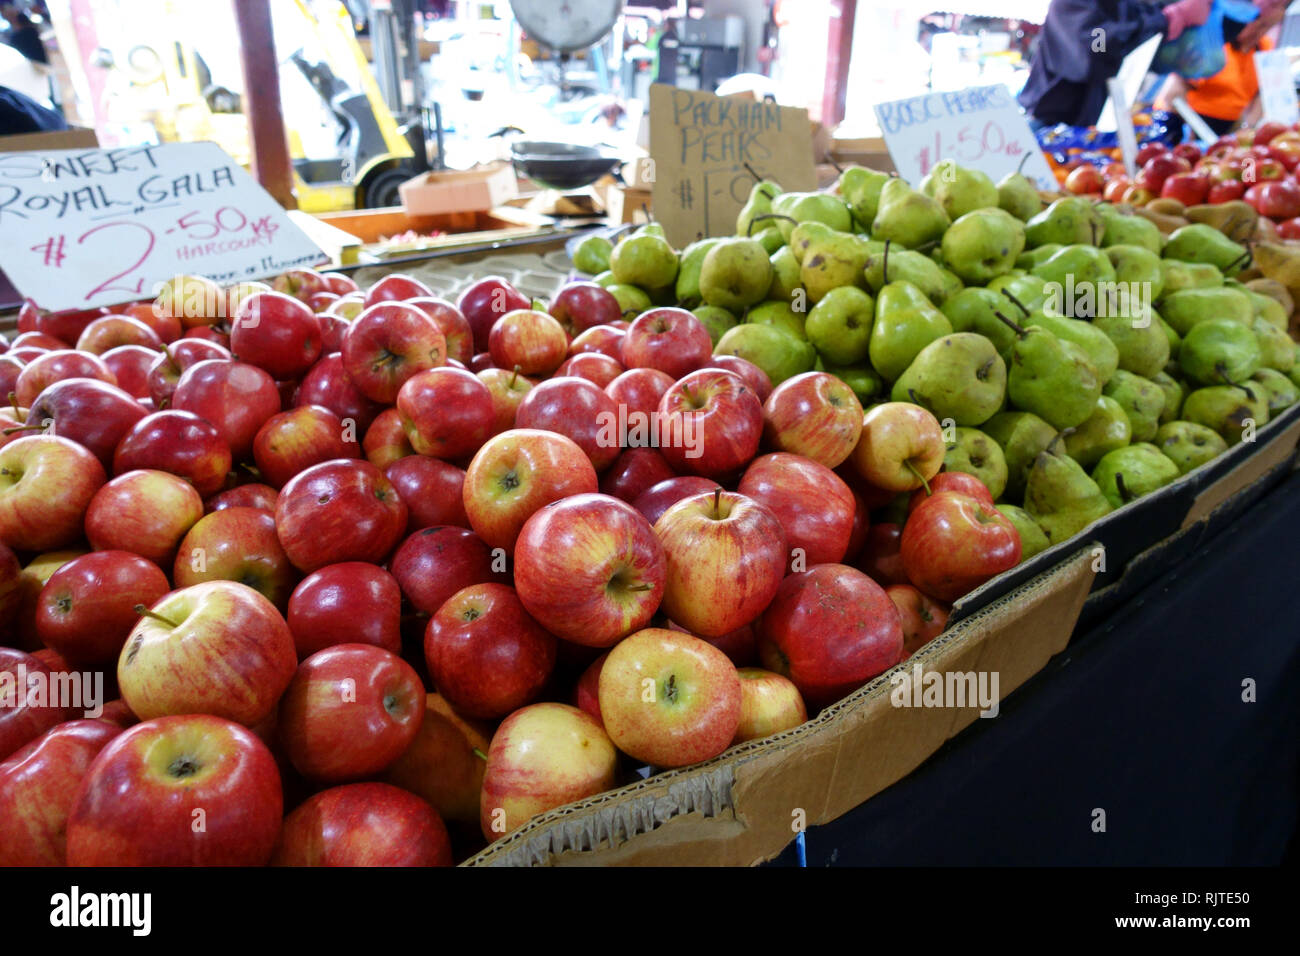 Fresh fruits like apples and pears sold at Victoria Market Melbourne Australia Stock Photo